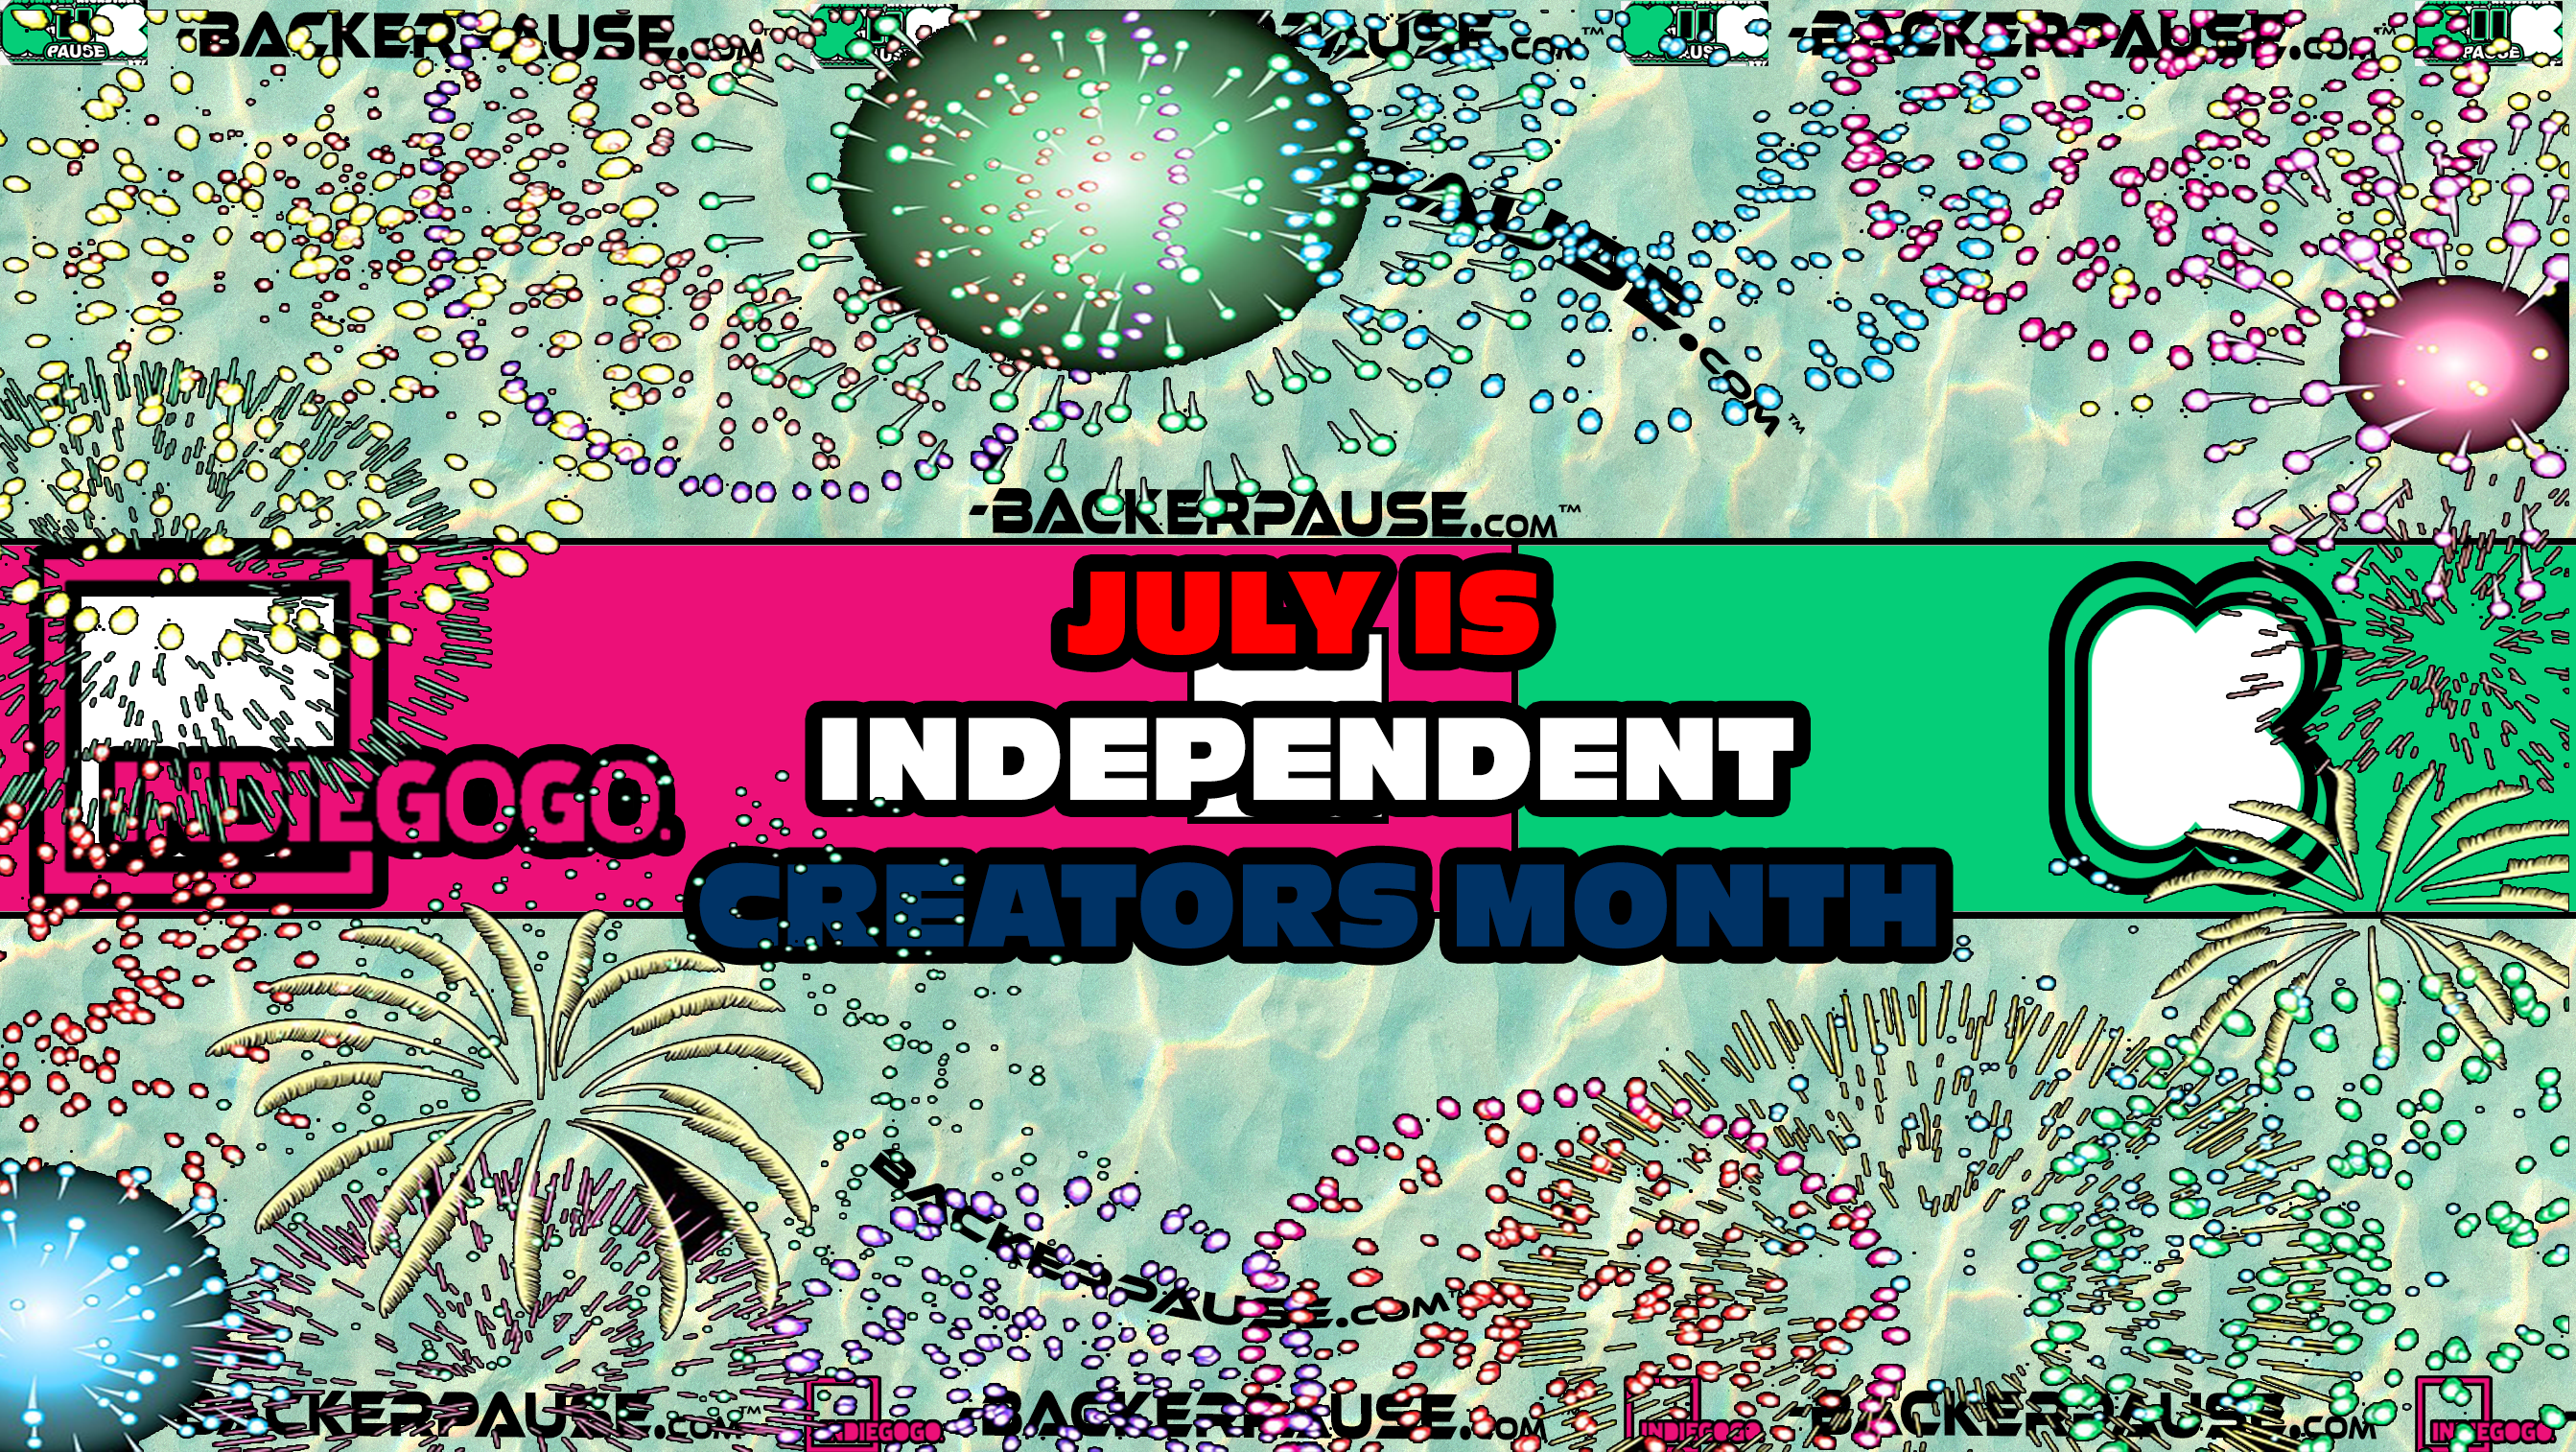 BACKER PAUSE: JULY is INDEPENDENT CREATORS MONTH so CELEBRATE  it by BACKING THEIR PROJECTS!!!